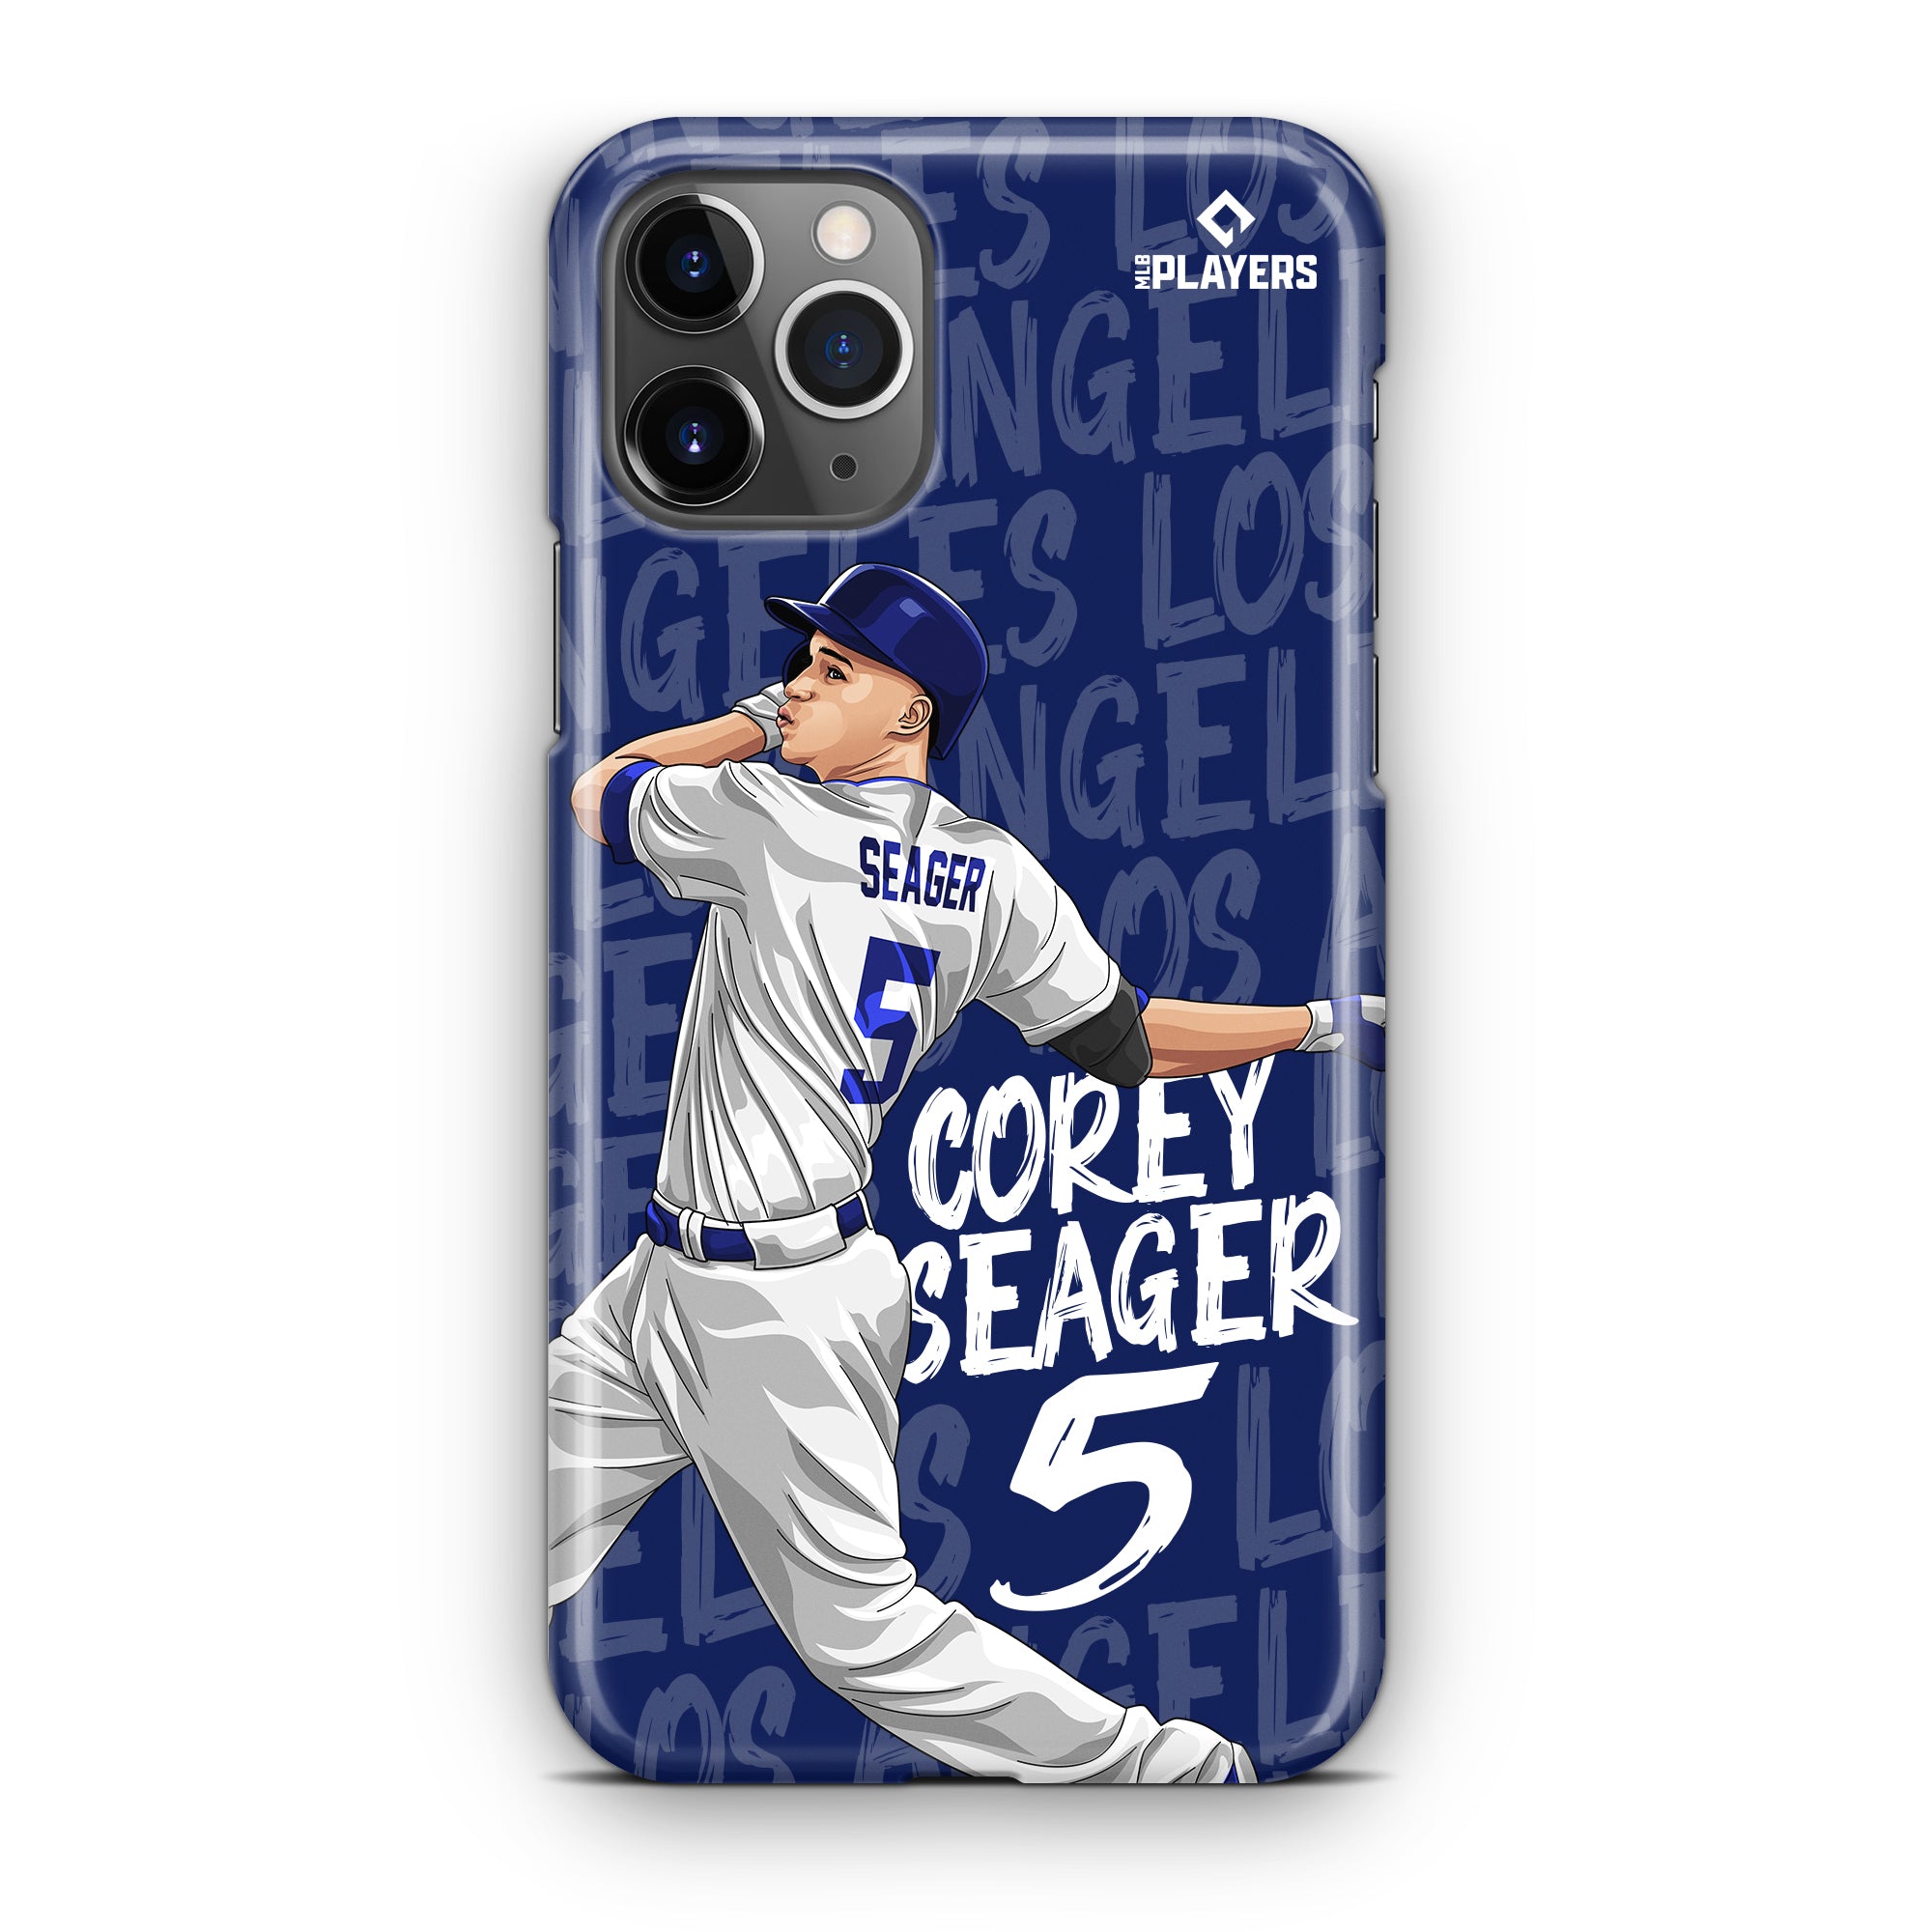 Seager Star Series 2.0 Case